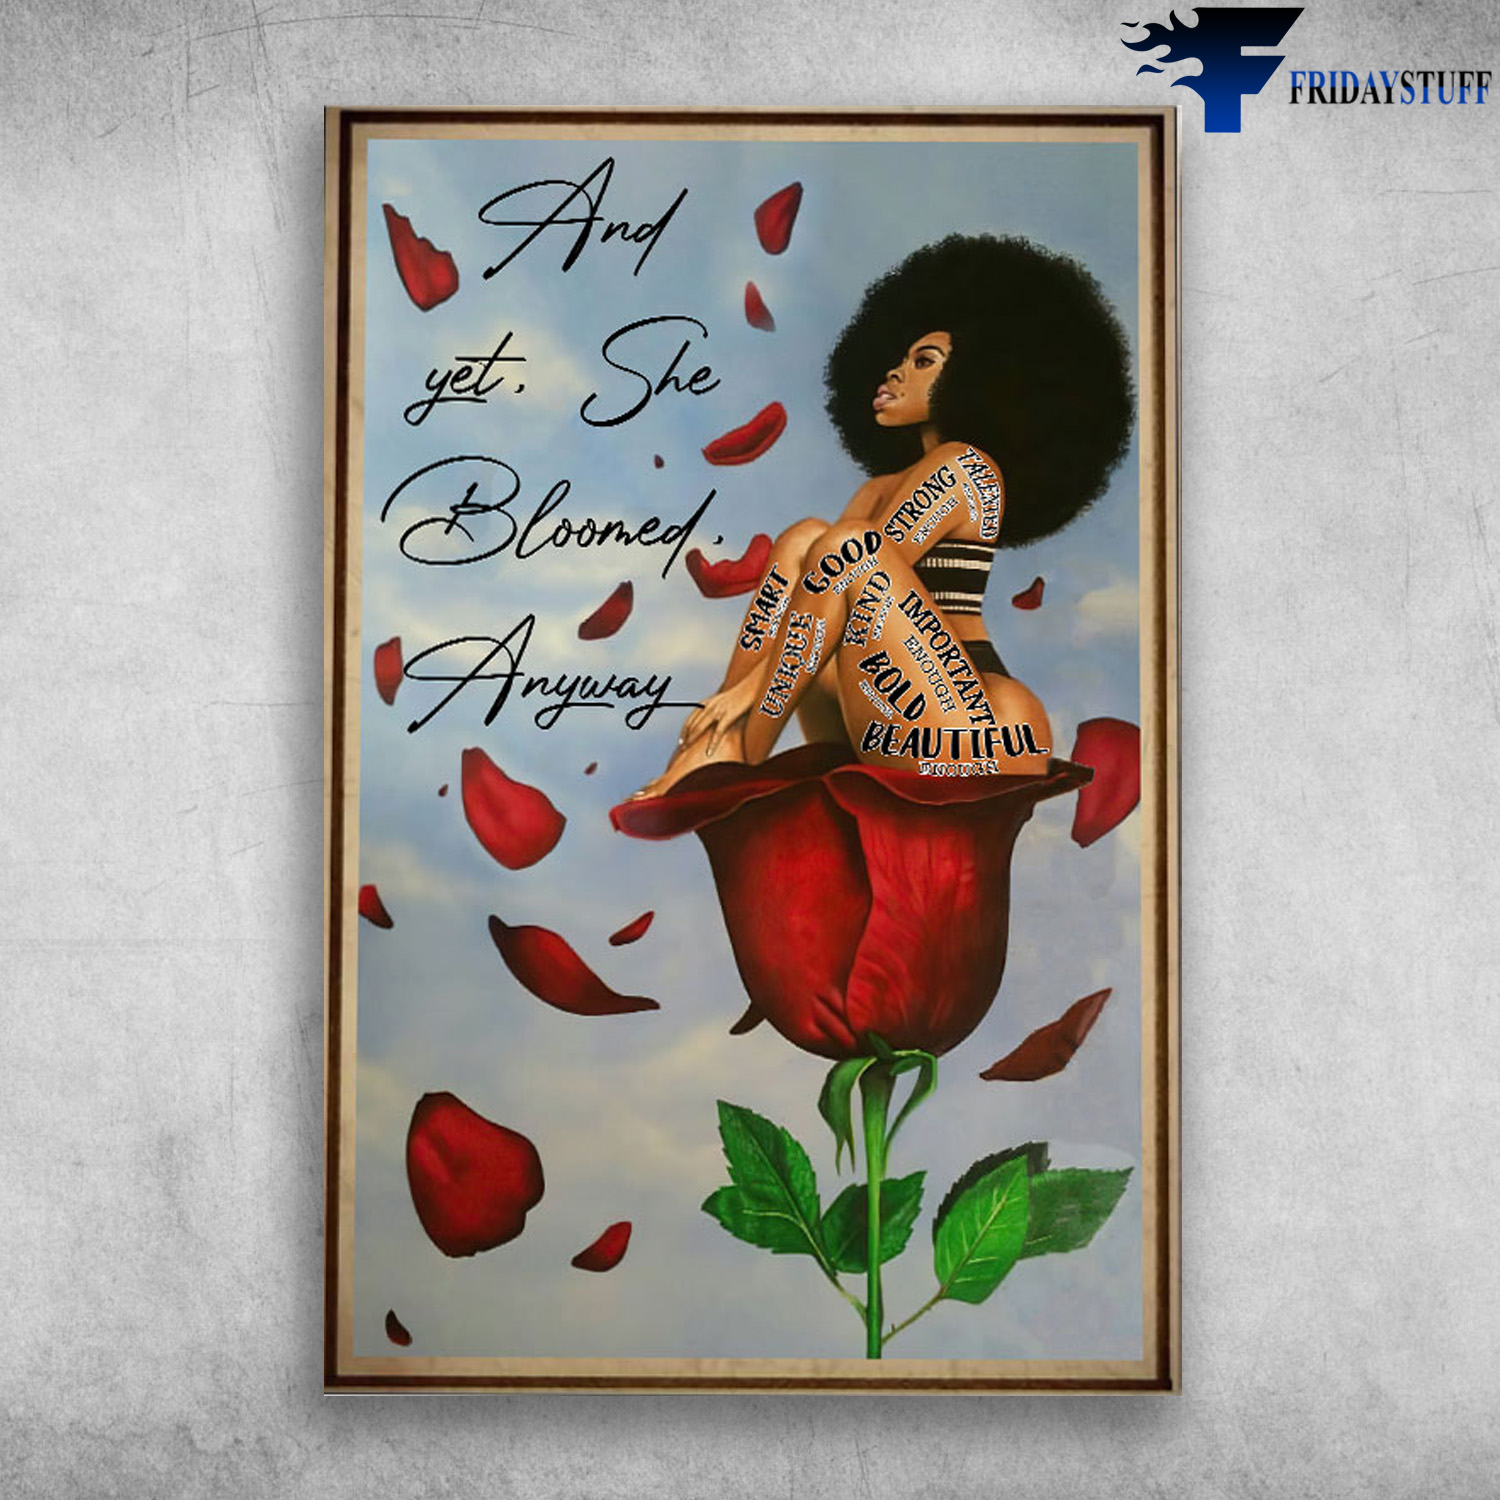 Black Girl With Rose - And Yet, She Bloomed Anyway, Smart, Good, Bold, Beautiful